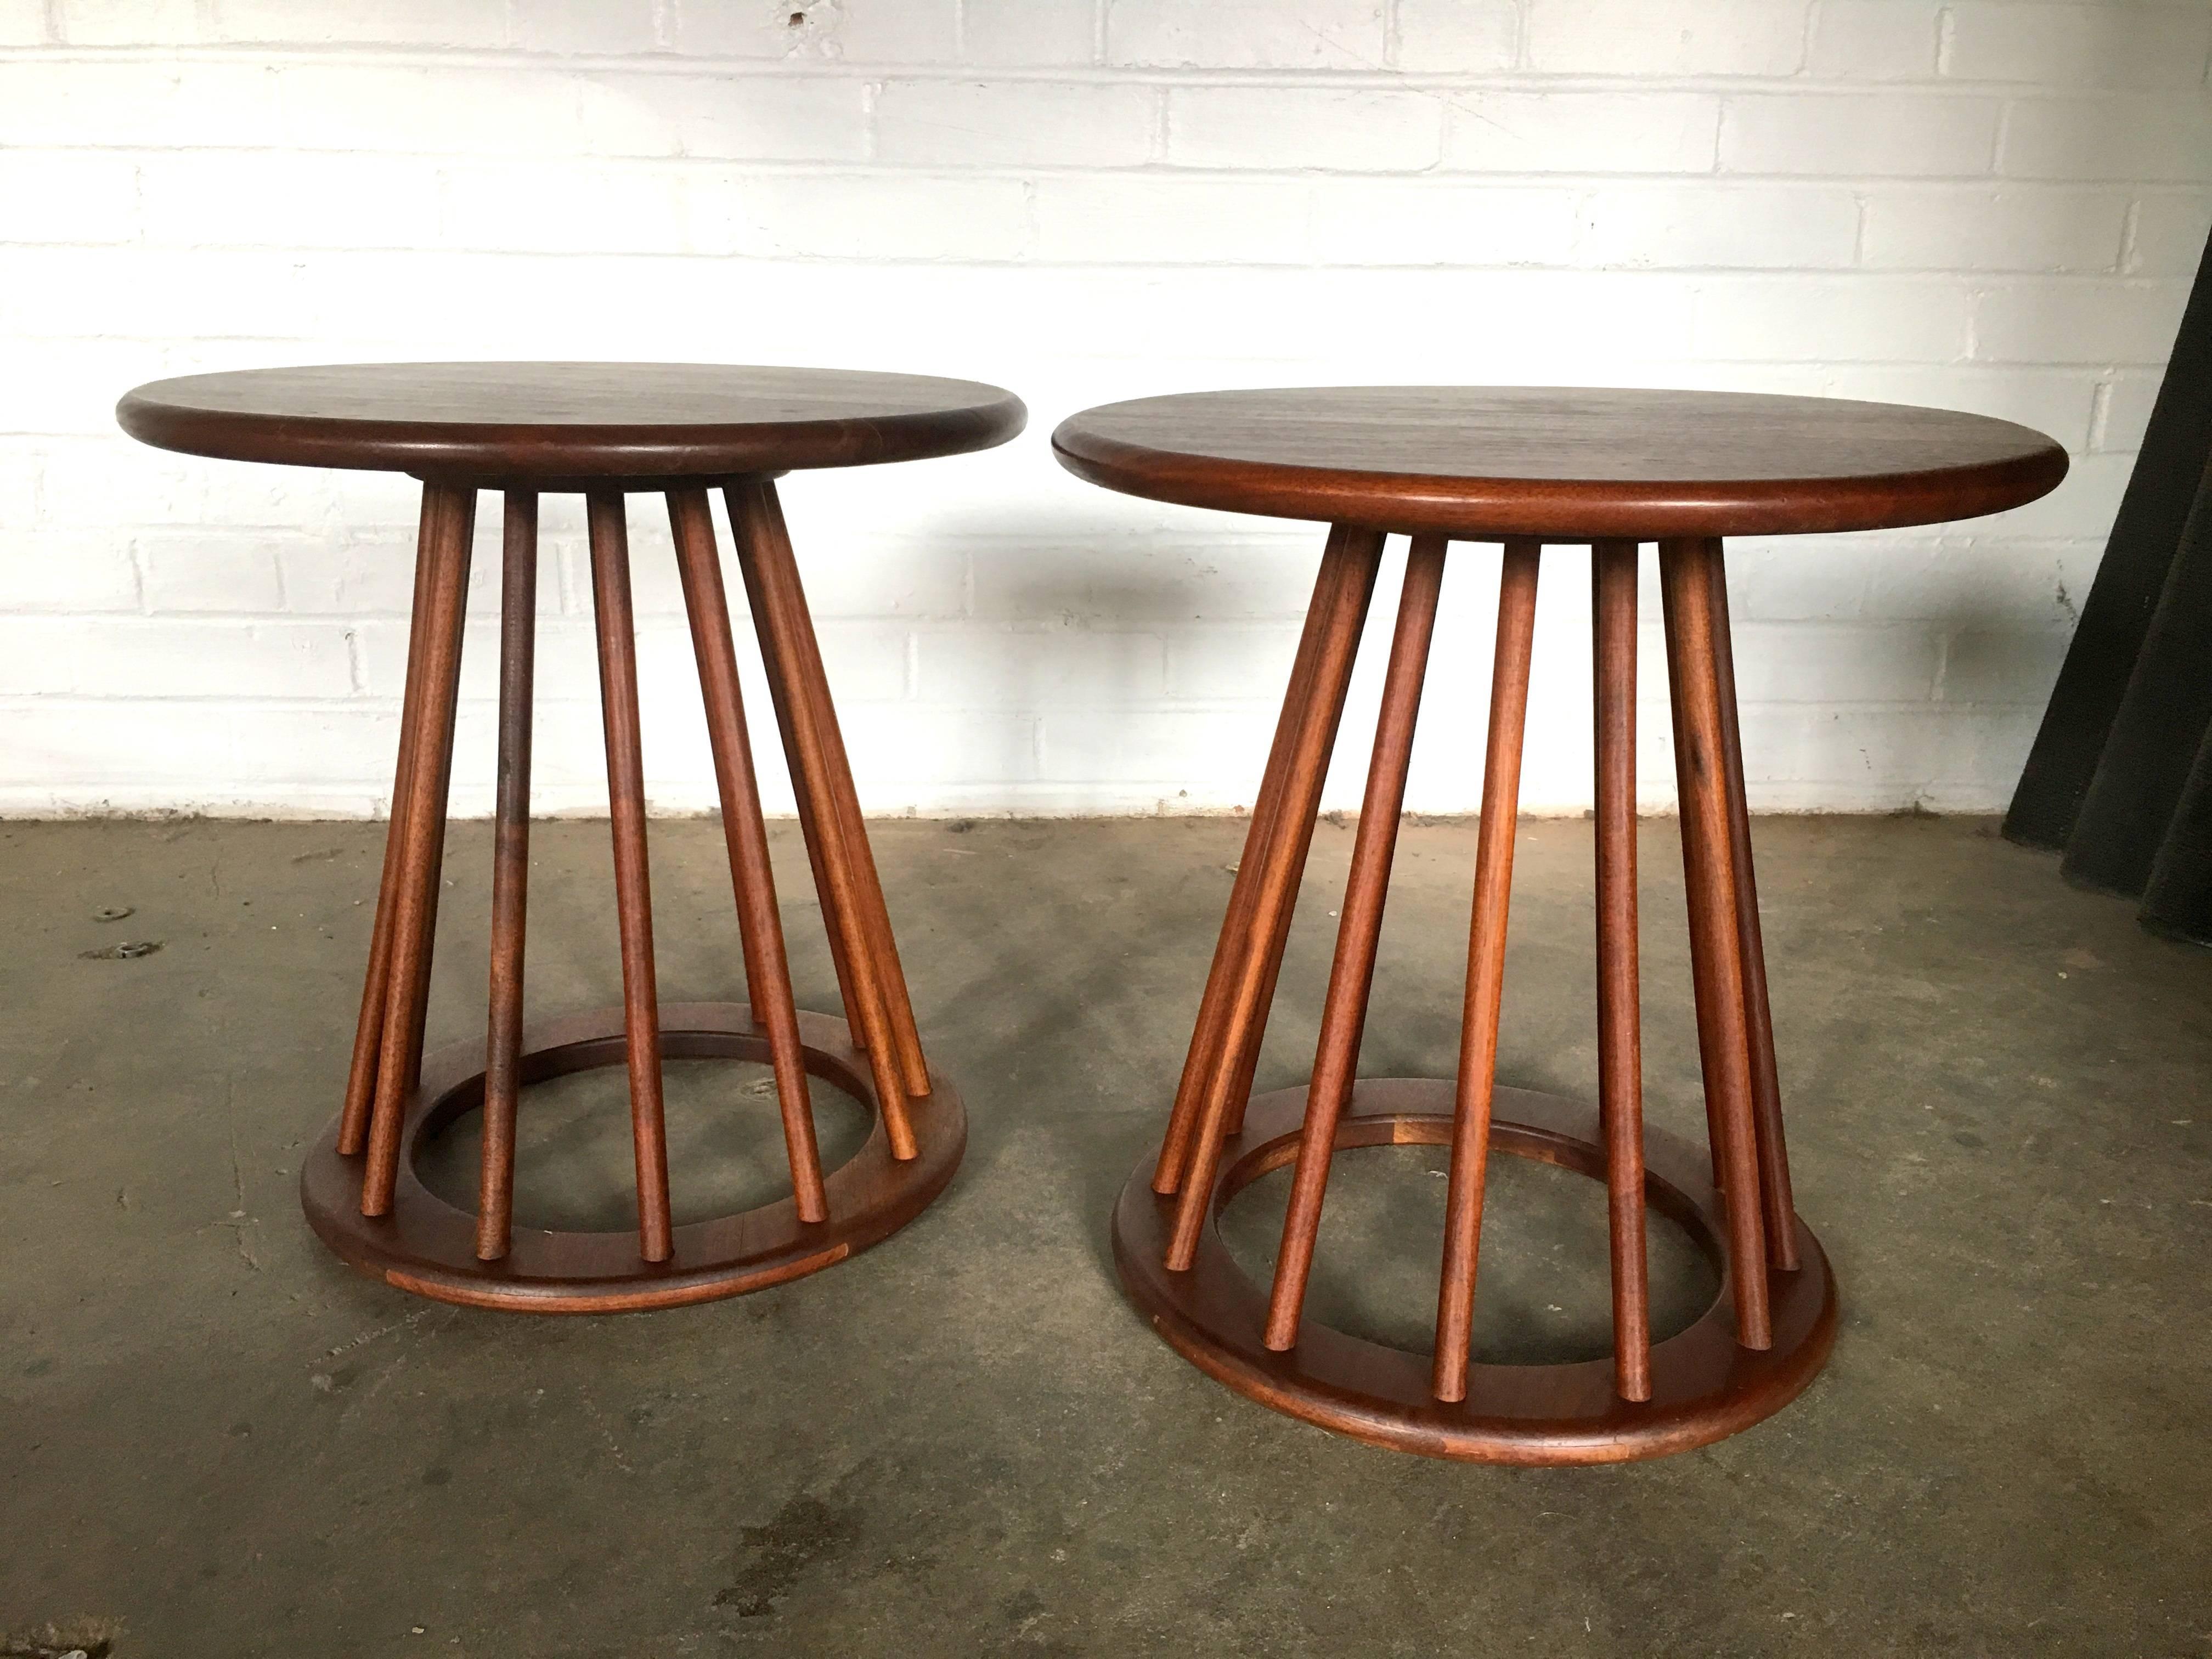 These gorgeous tables have been lovingly reconditioned to bring out the original walnut grain.
No breaks or chips anywhere. Just Glorious Gems to be used as you wish!
Measures: 16